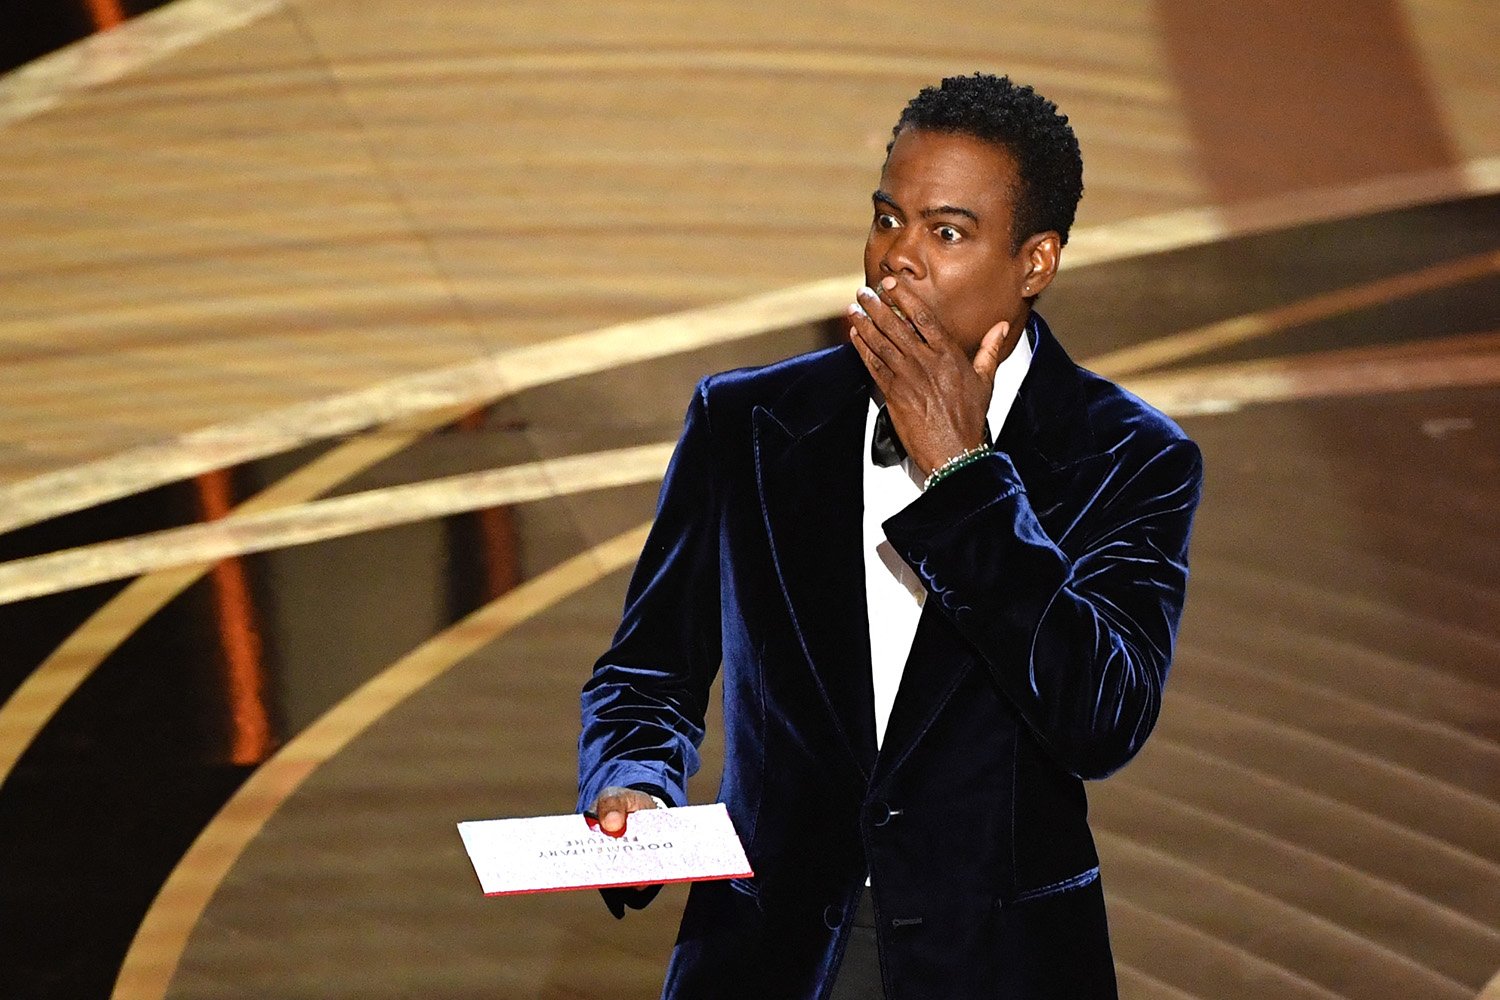 Chris Rock looks shocked at the Oscars 2022 after his joke about Jada Pinkett Smith.